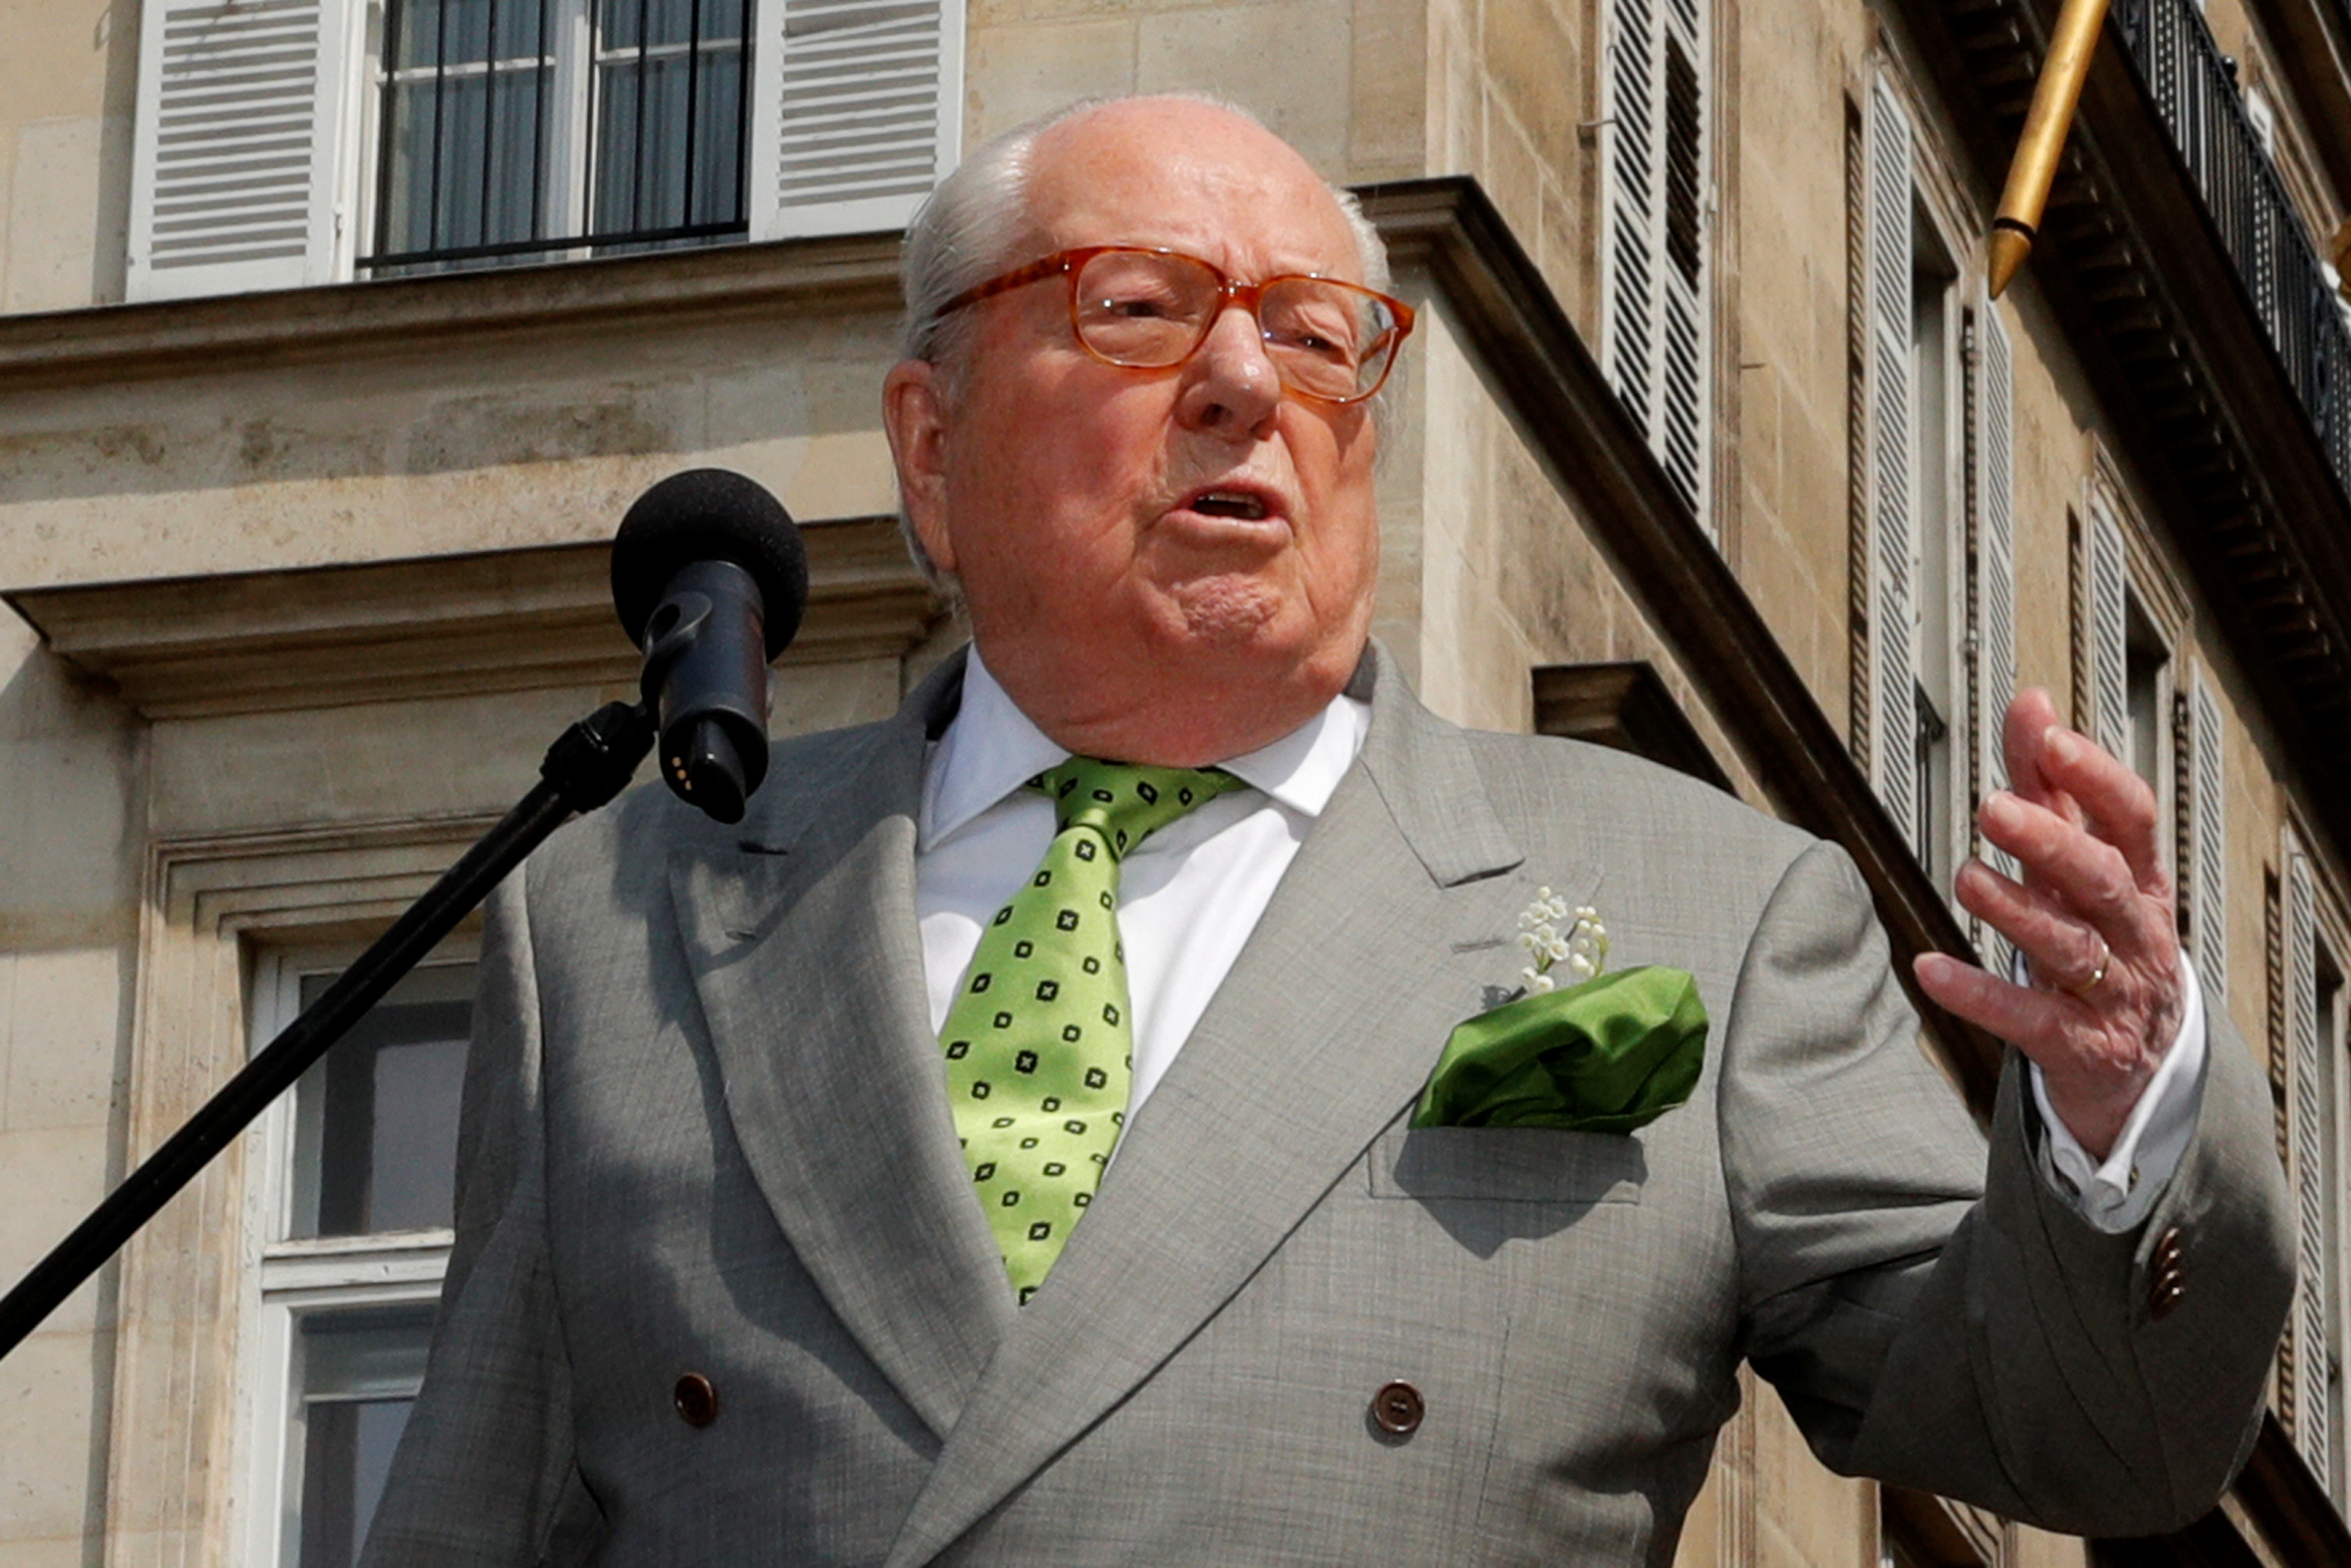 French far-right National Front (FN) founder Jean-Marie Le Pen attends a May Day ceremony in front of the statue of Jeanne d'Arc (Joan of Arc) in Paris